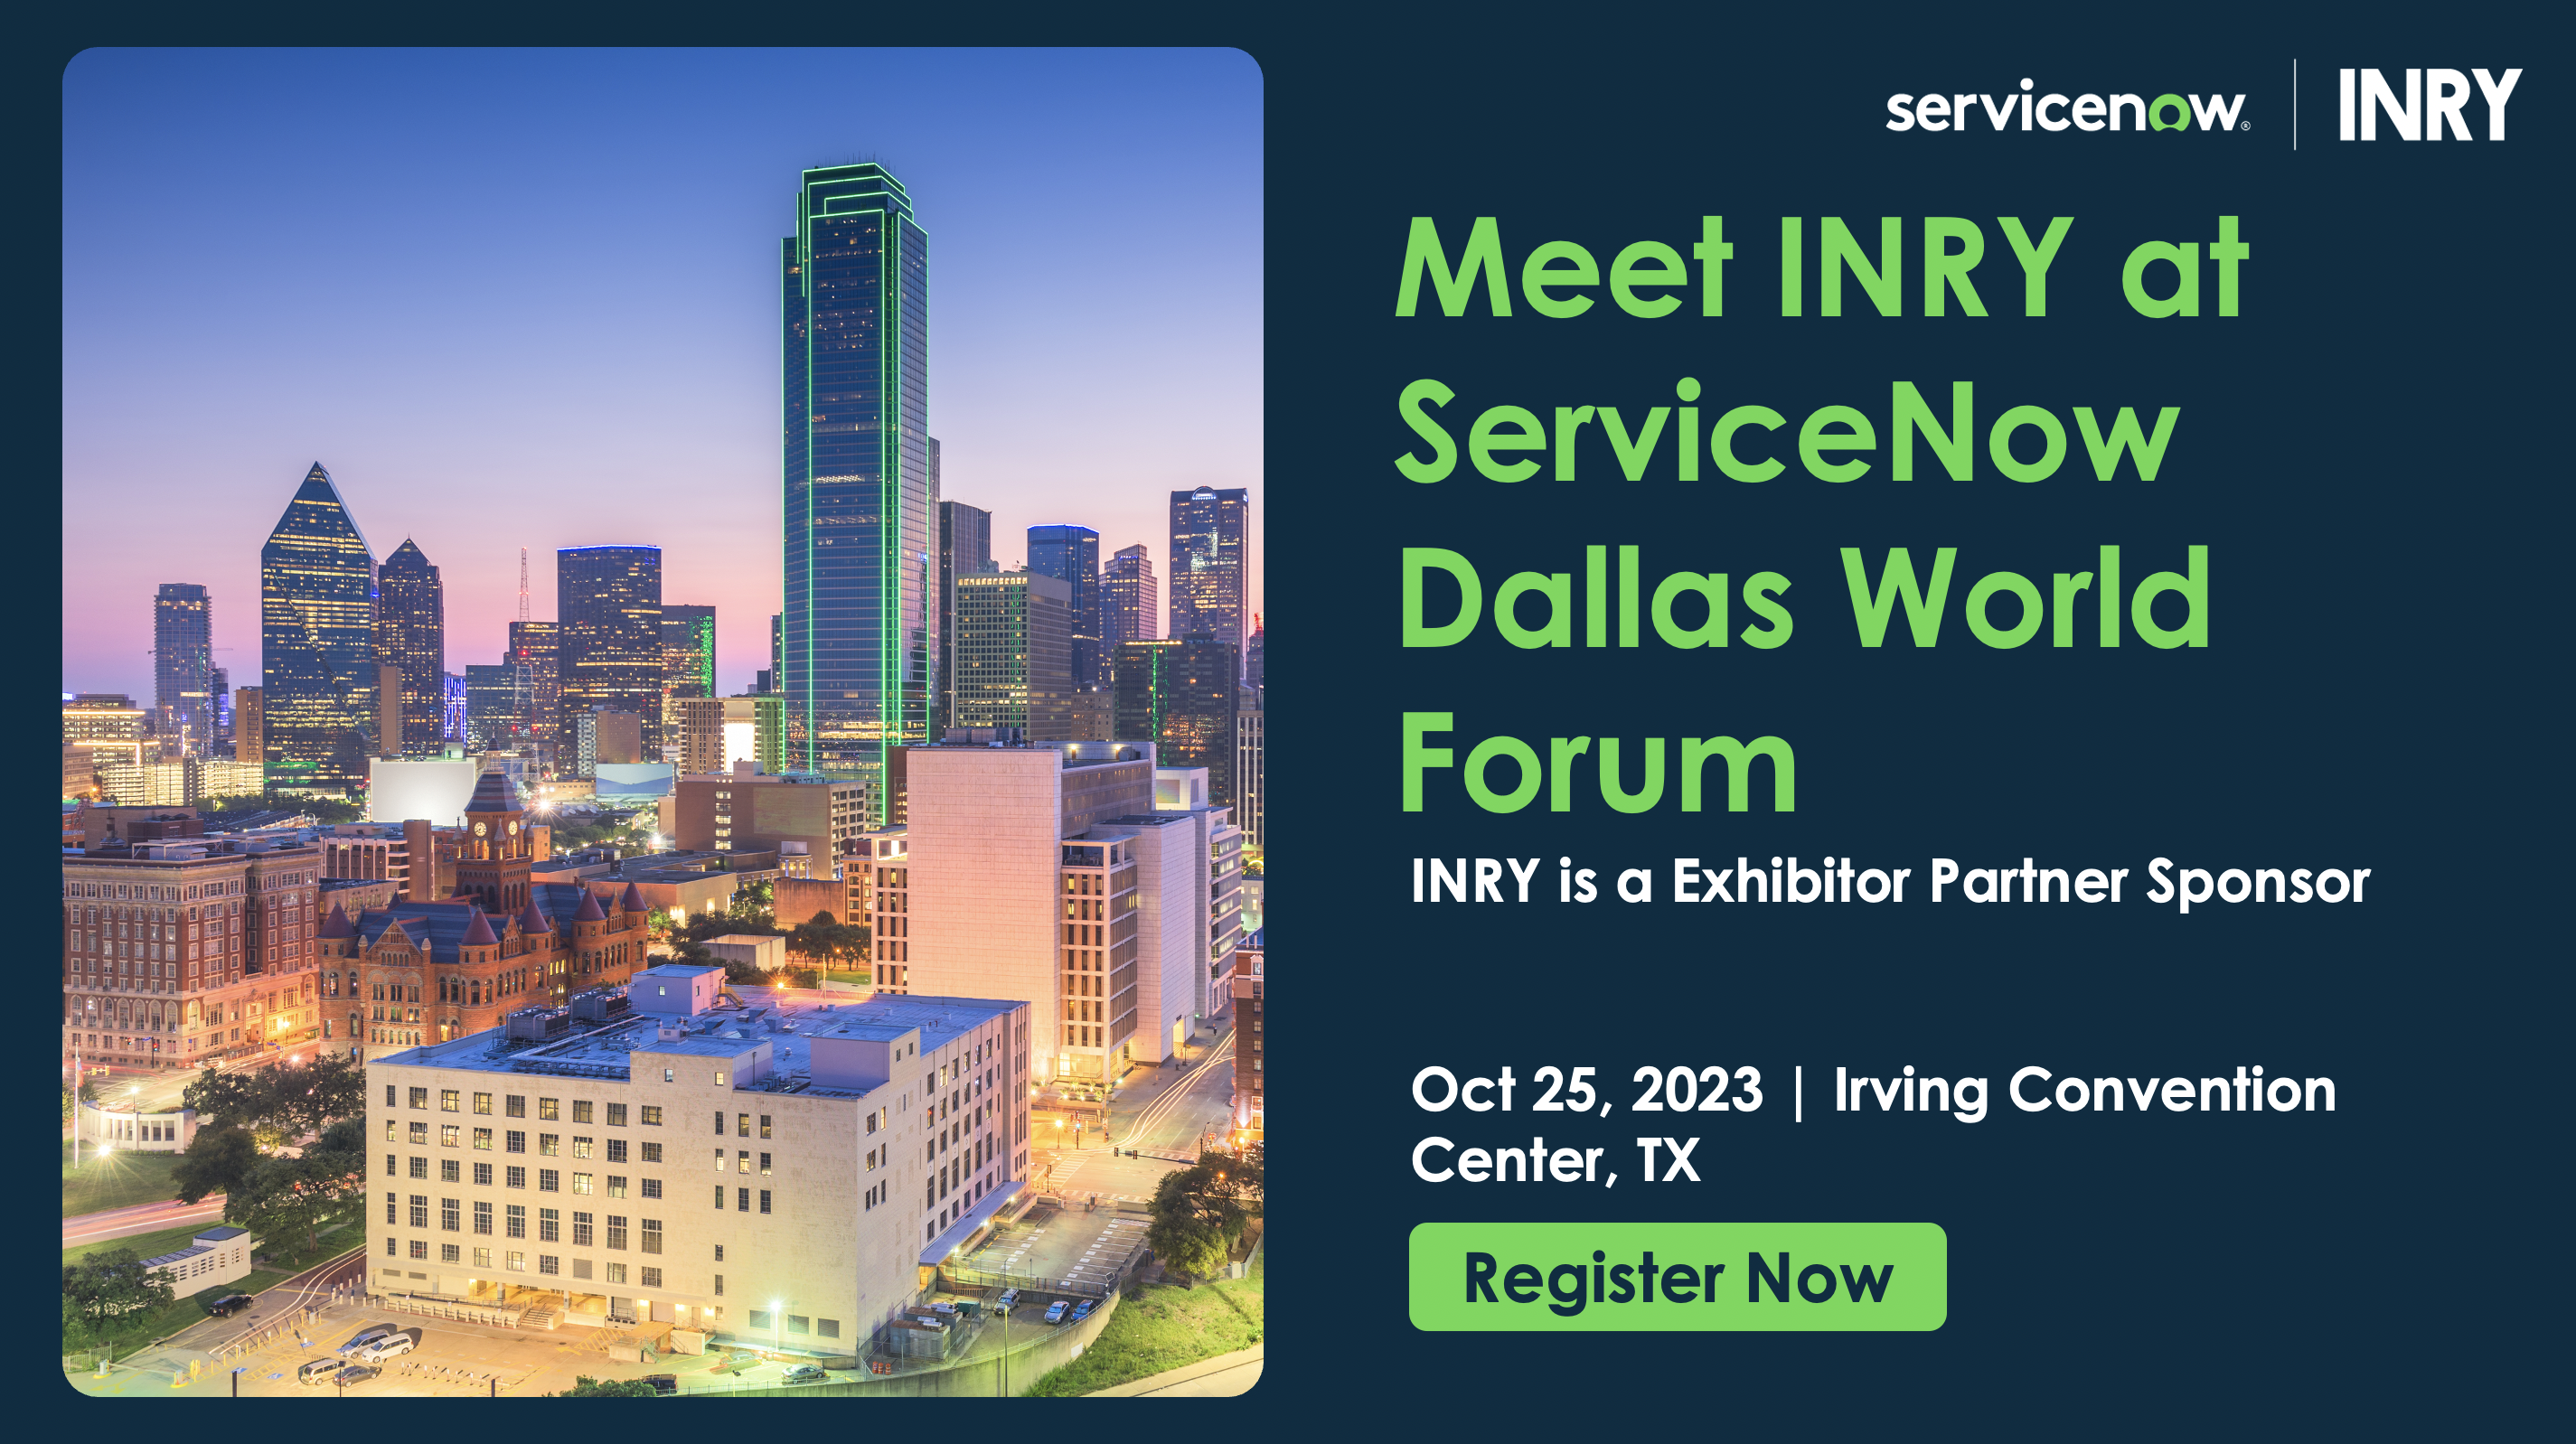 Meet INRY at ServiceNow Dallas World Forum